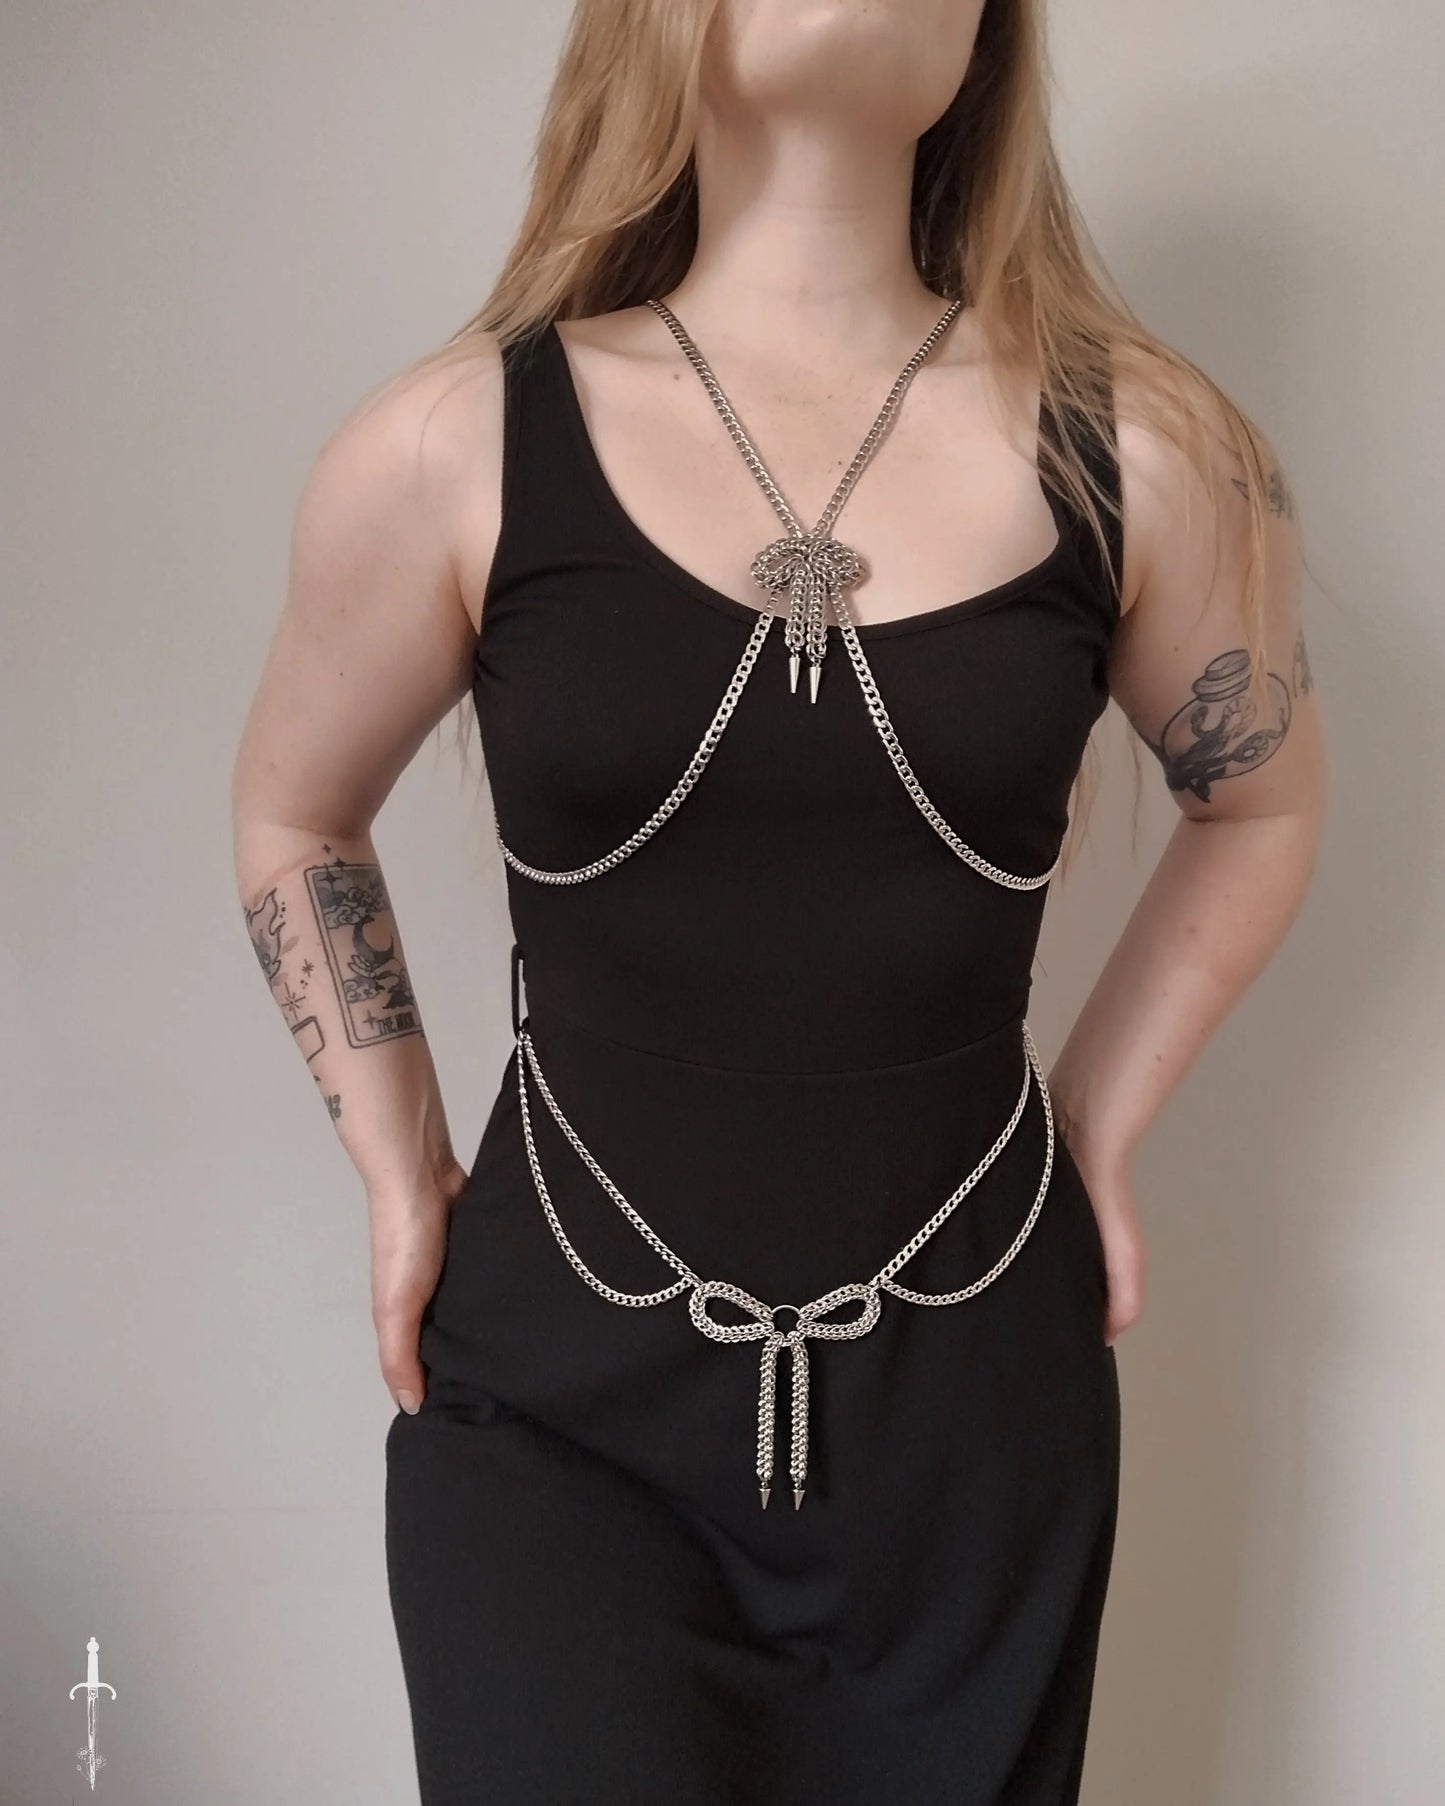 The Bow Chainmail Body Chain in Stainless Steel